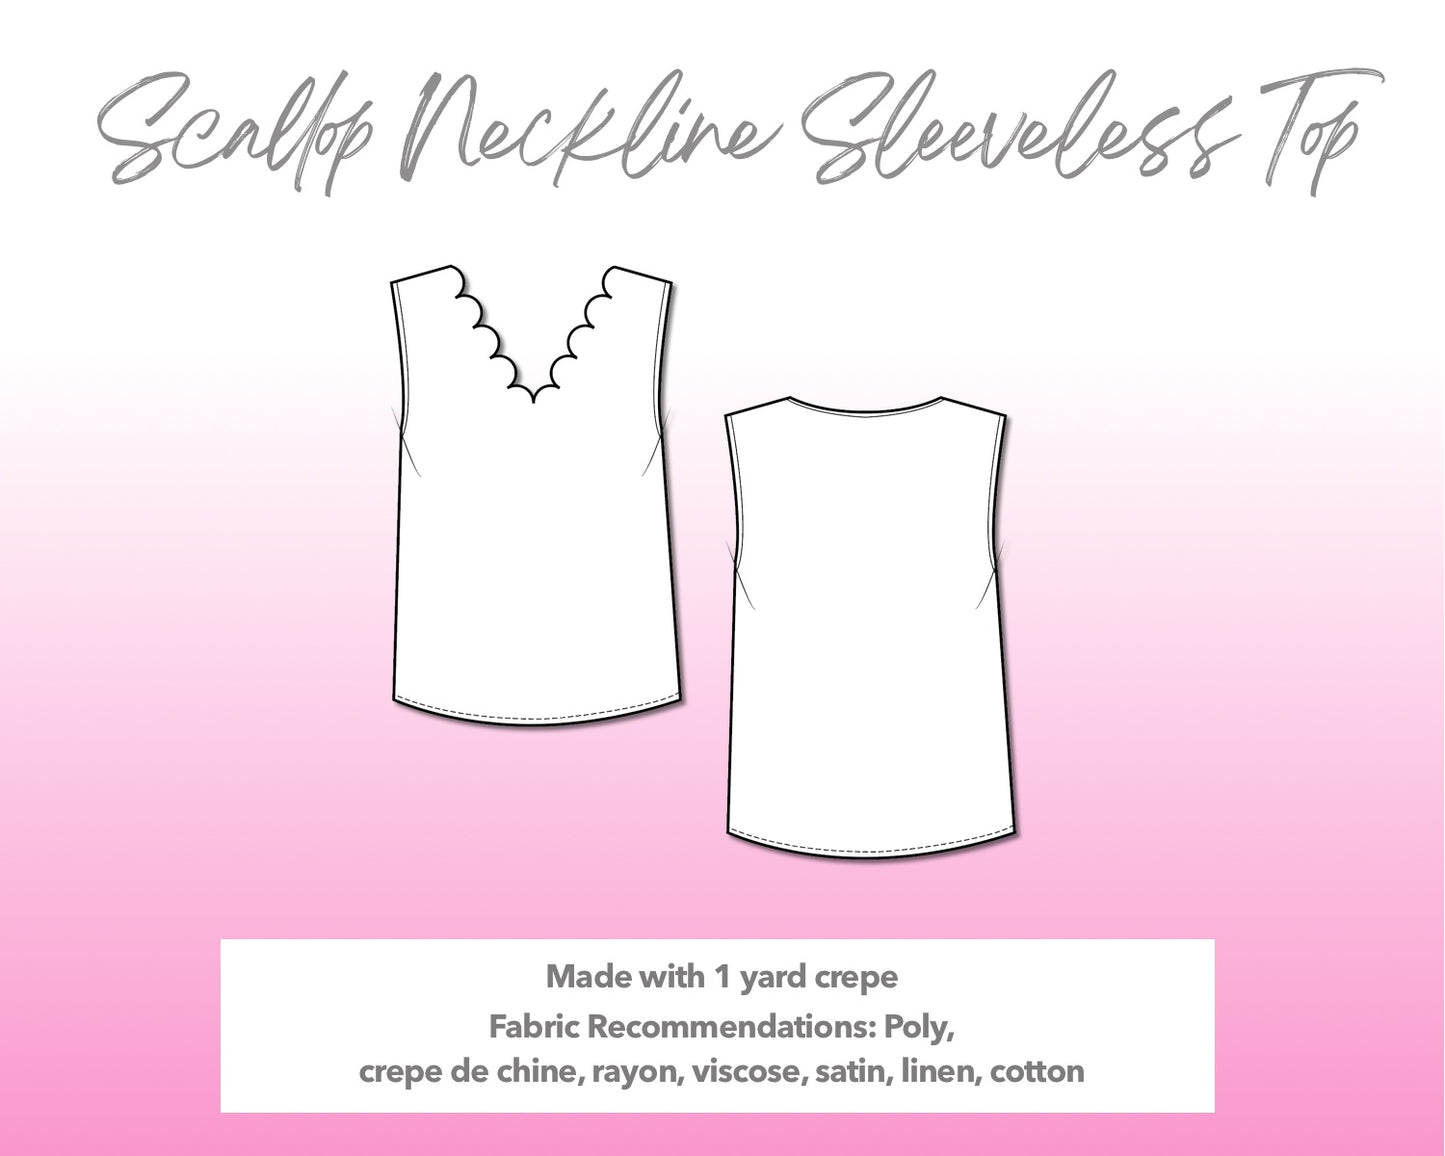 Illustration and detailed description for Scallop Neckline Sleeveless Top sewing pattern.